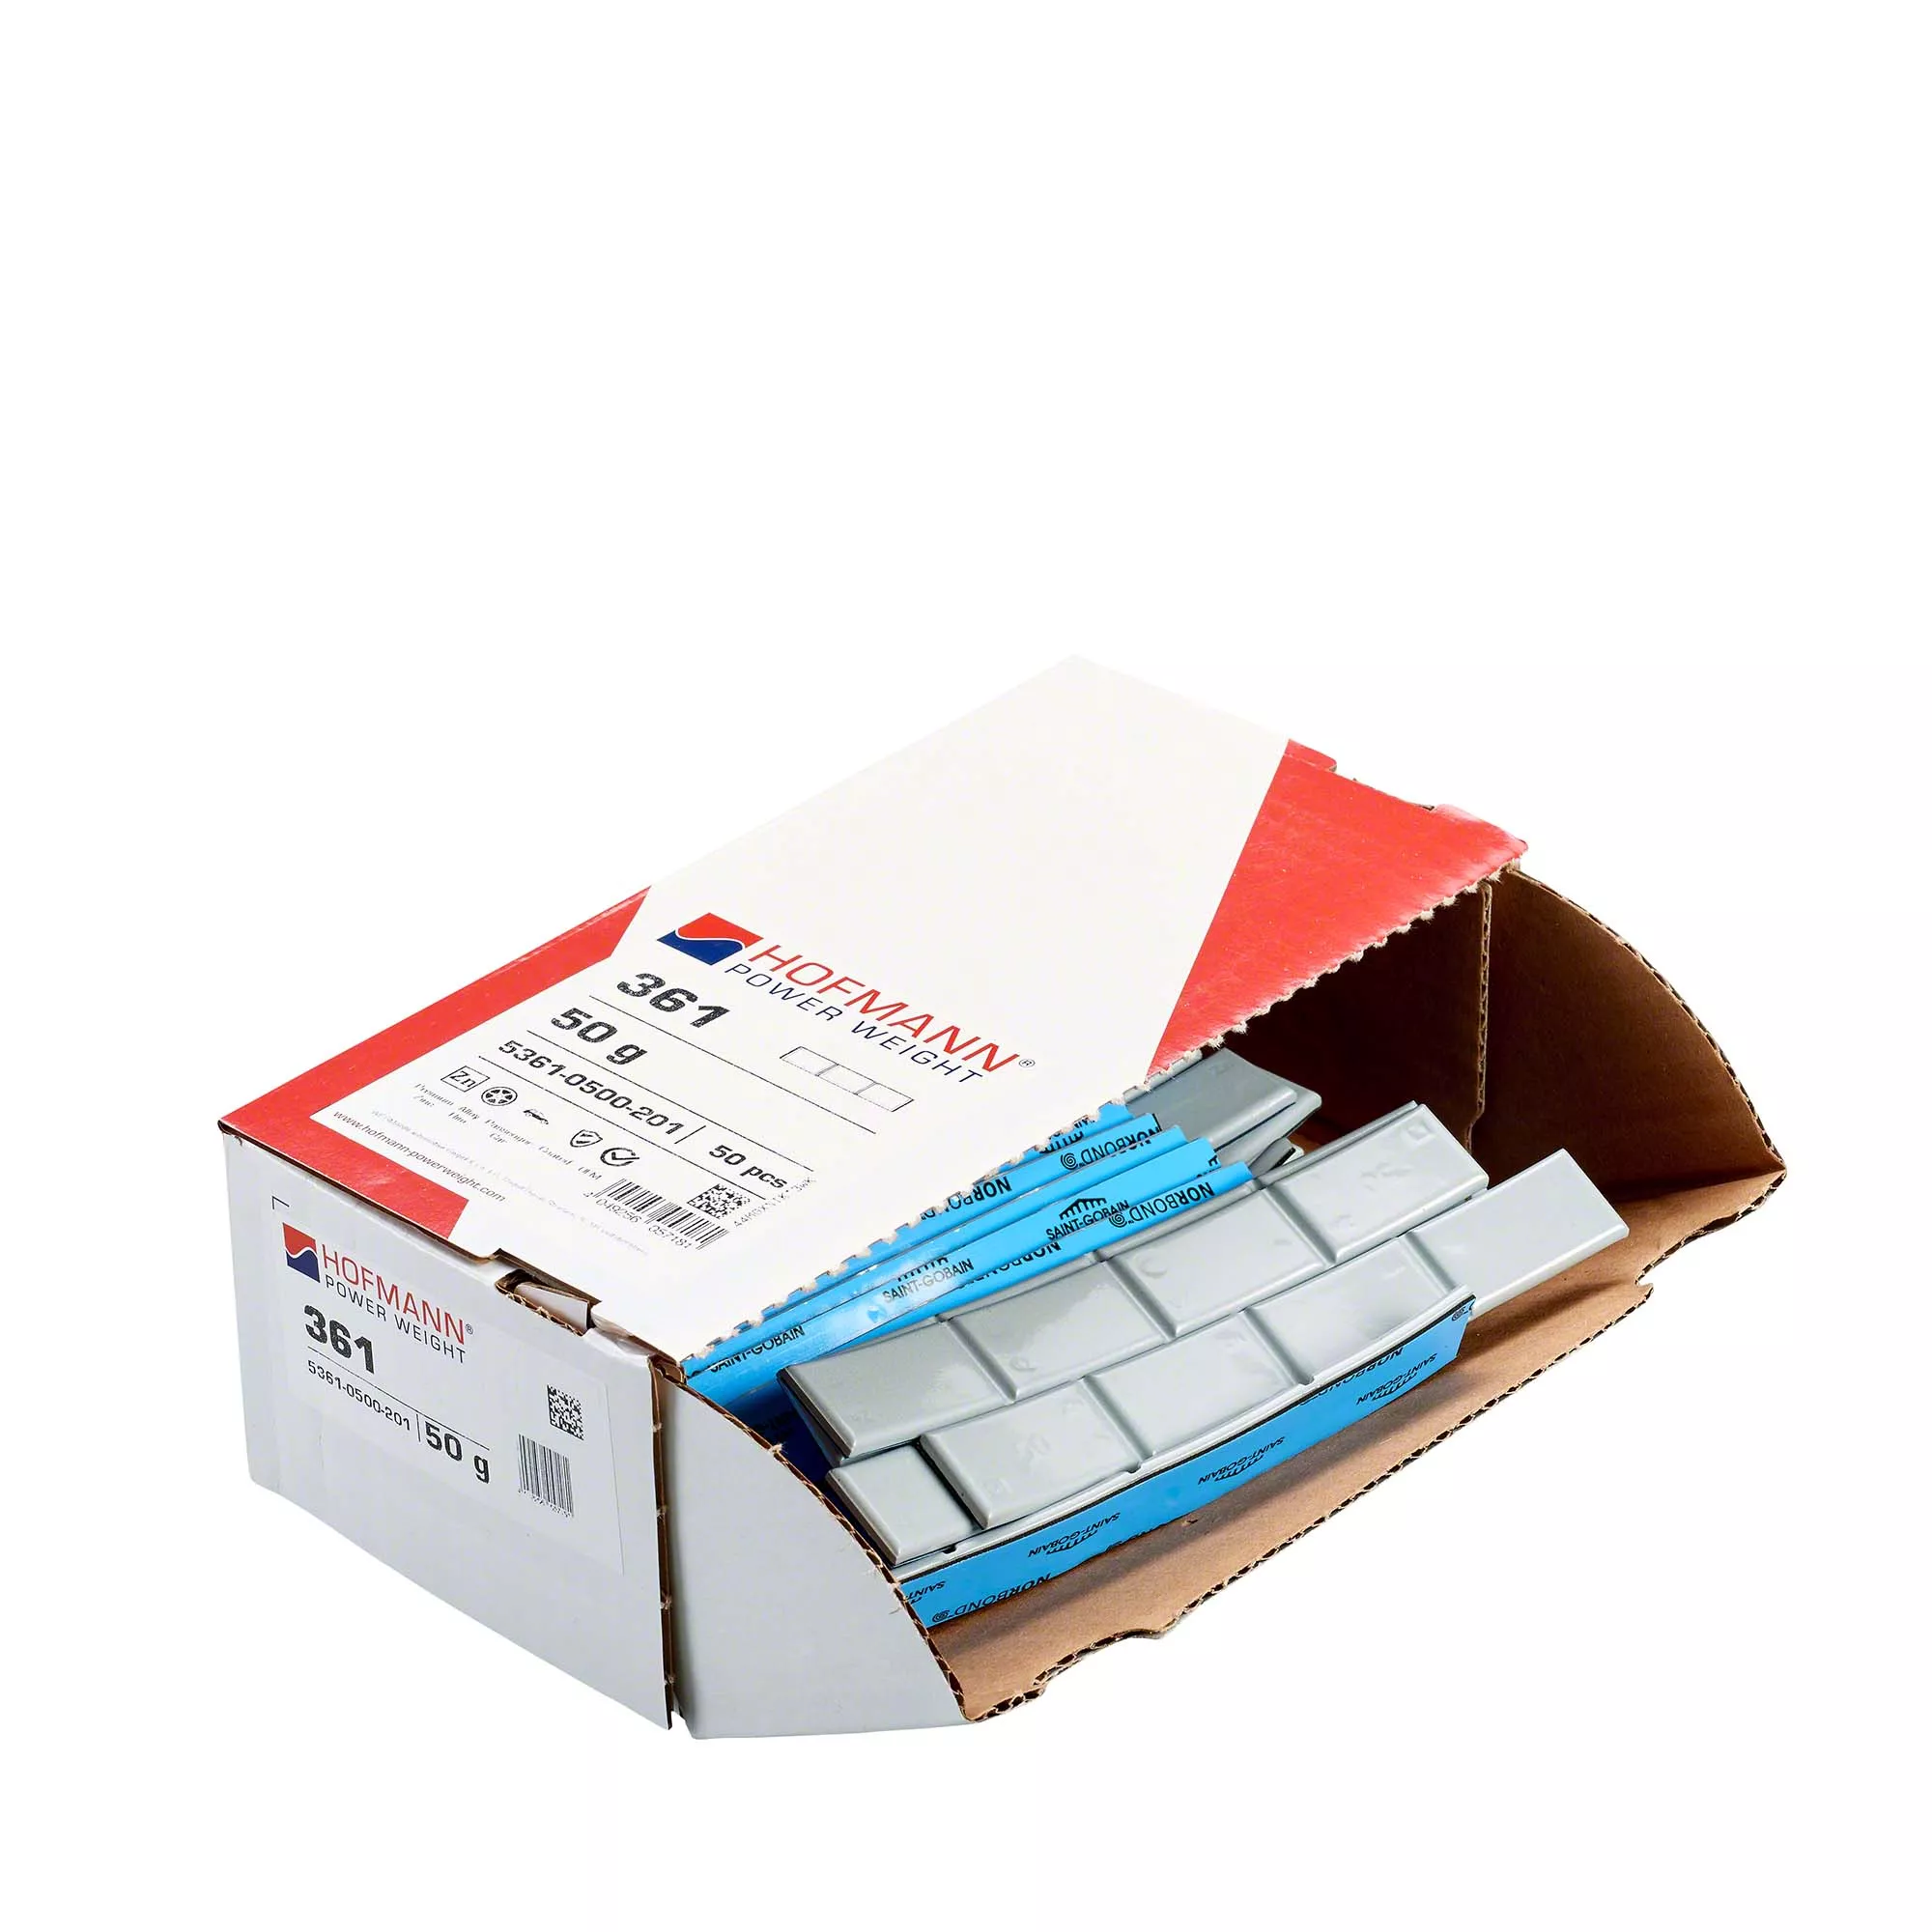 adhesive weight - Typ 361, 50 g, zinc, silver